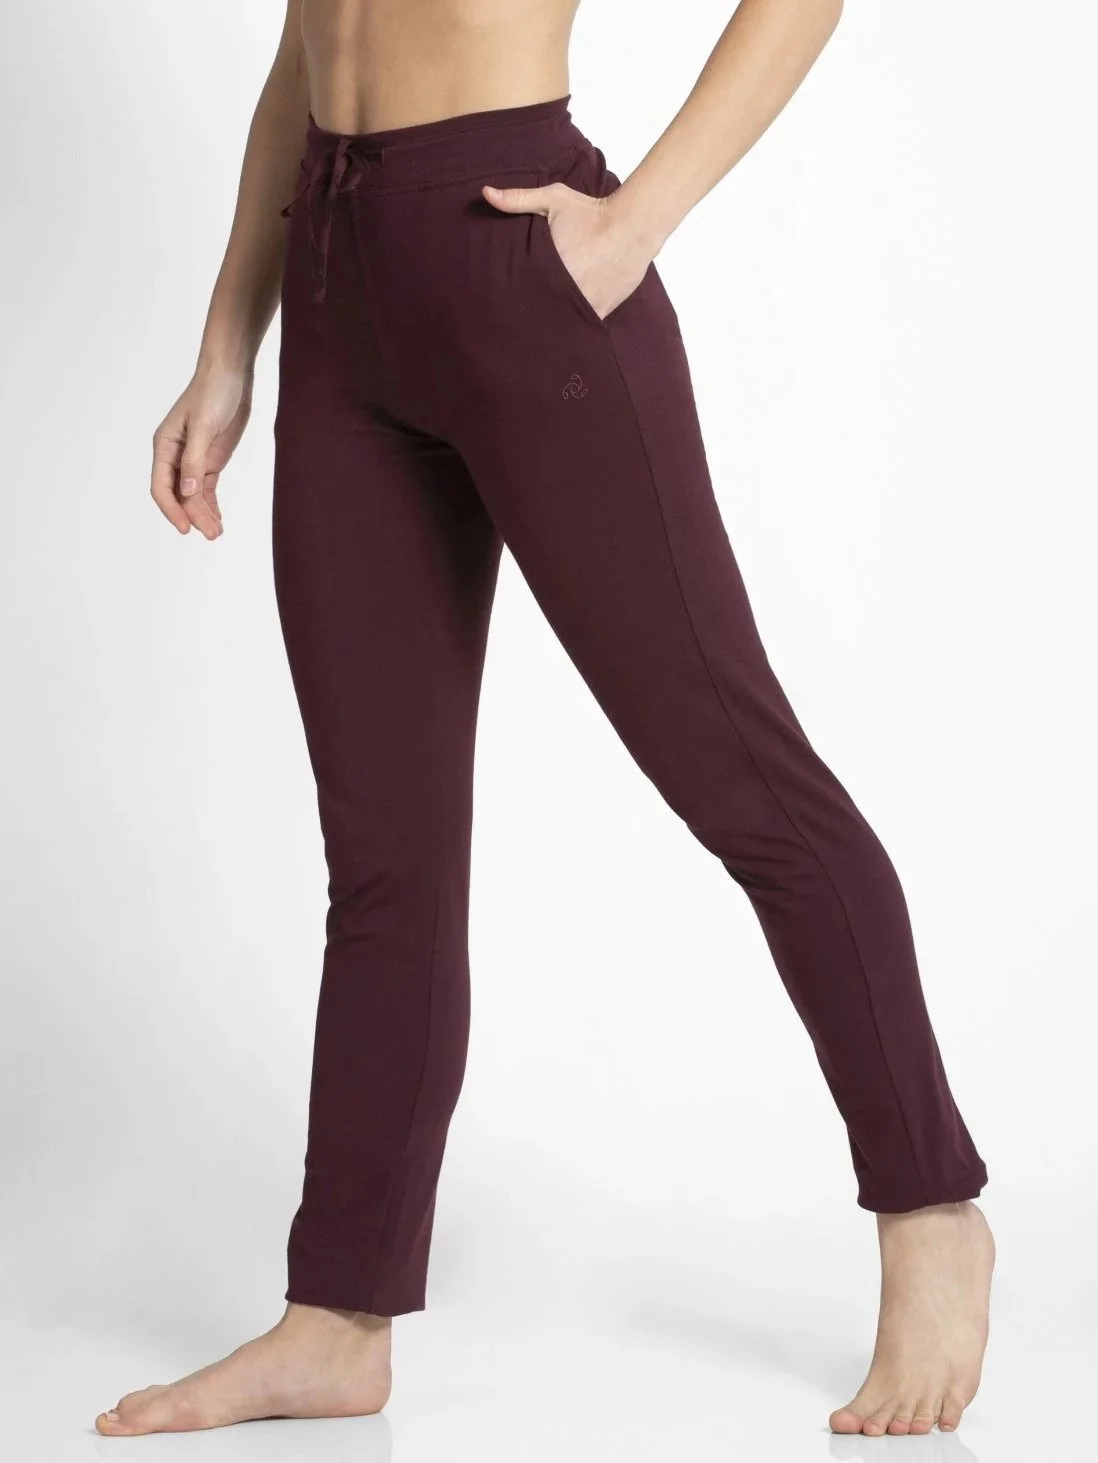 Jockey Wine Tasting colour Track Pant for Women with Side Pocket-1301WINTG